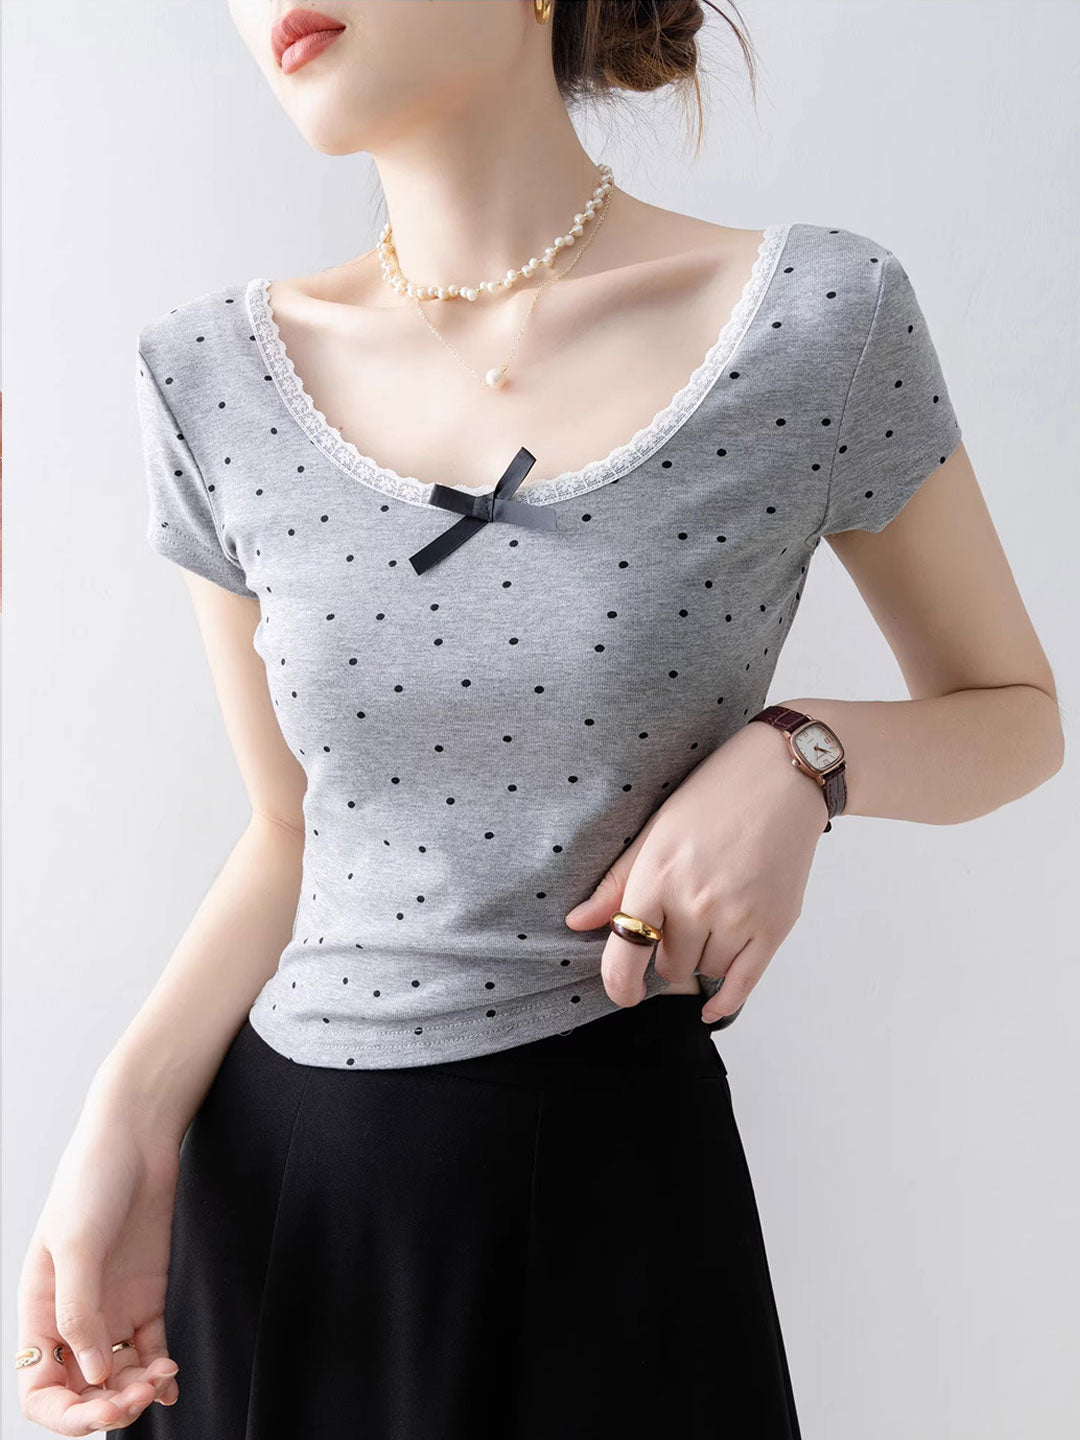 Molly Classic Square Neck Polka Dot Lace Bow Top